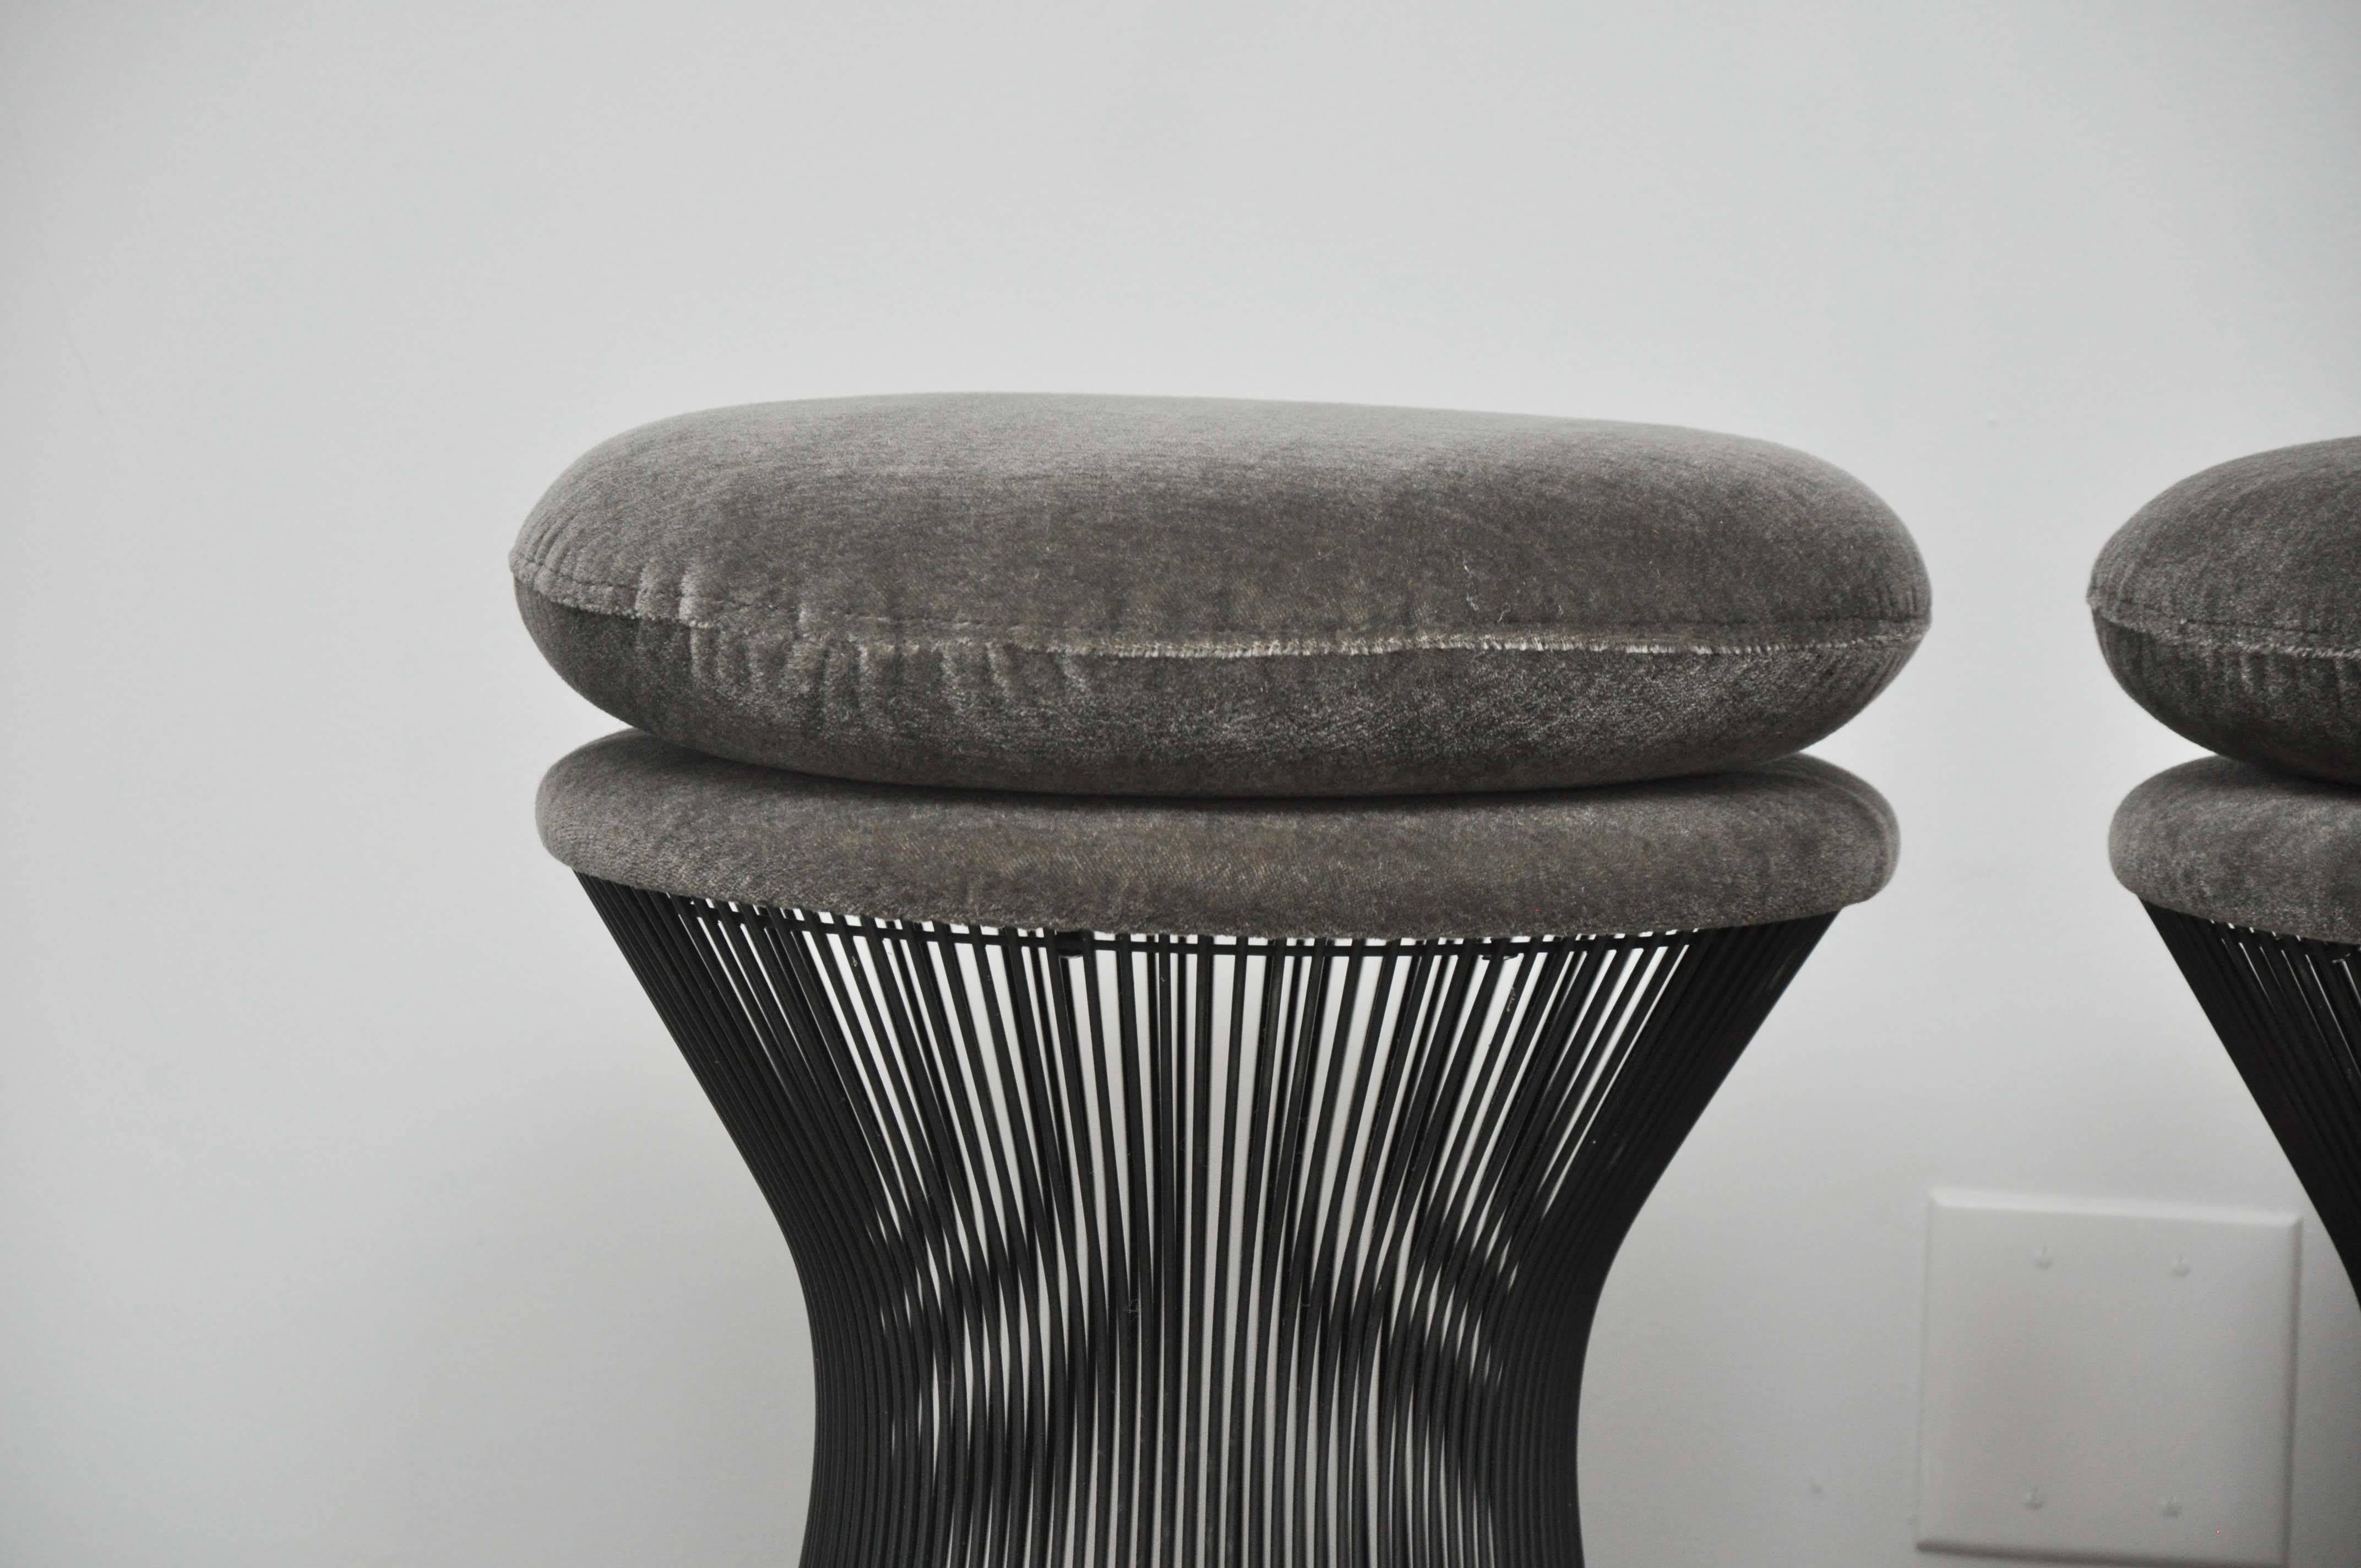 Pair of bronze frame stools by Warren Platner for Knoll, circa 1970. New mohair cushions.